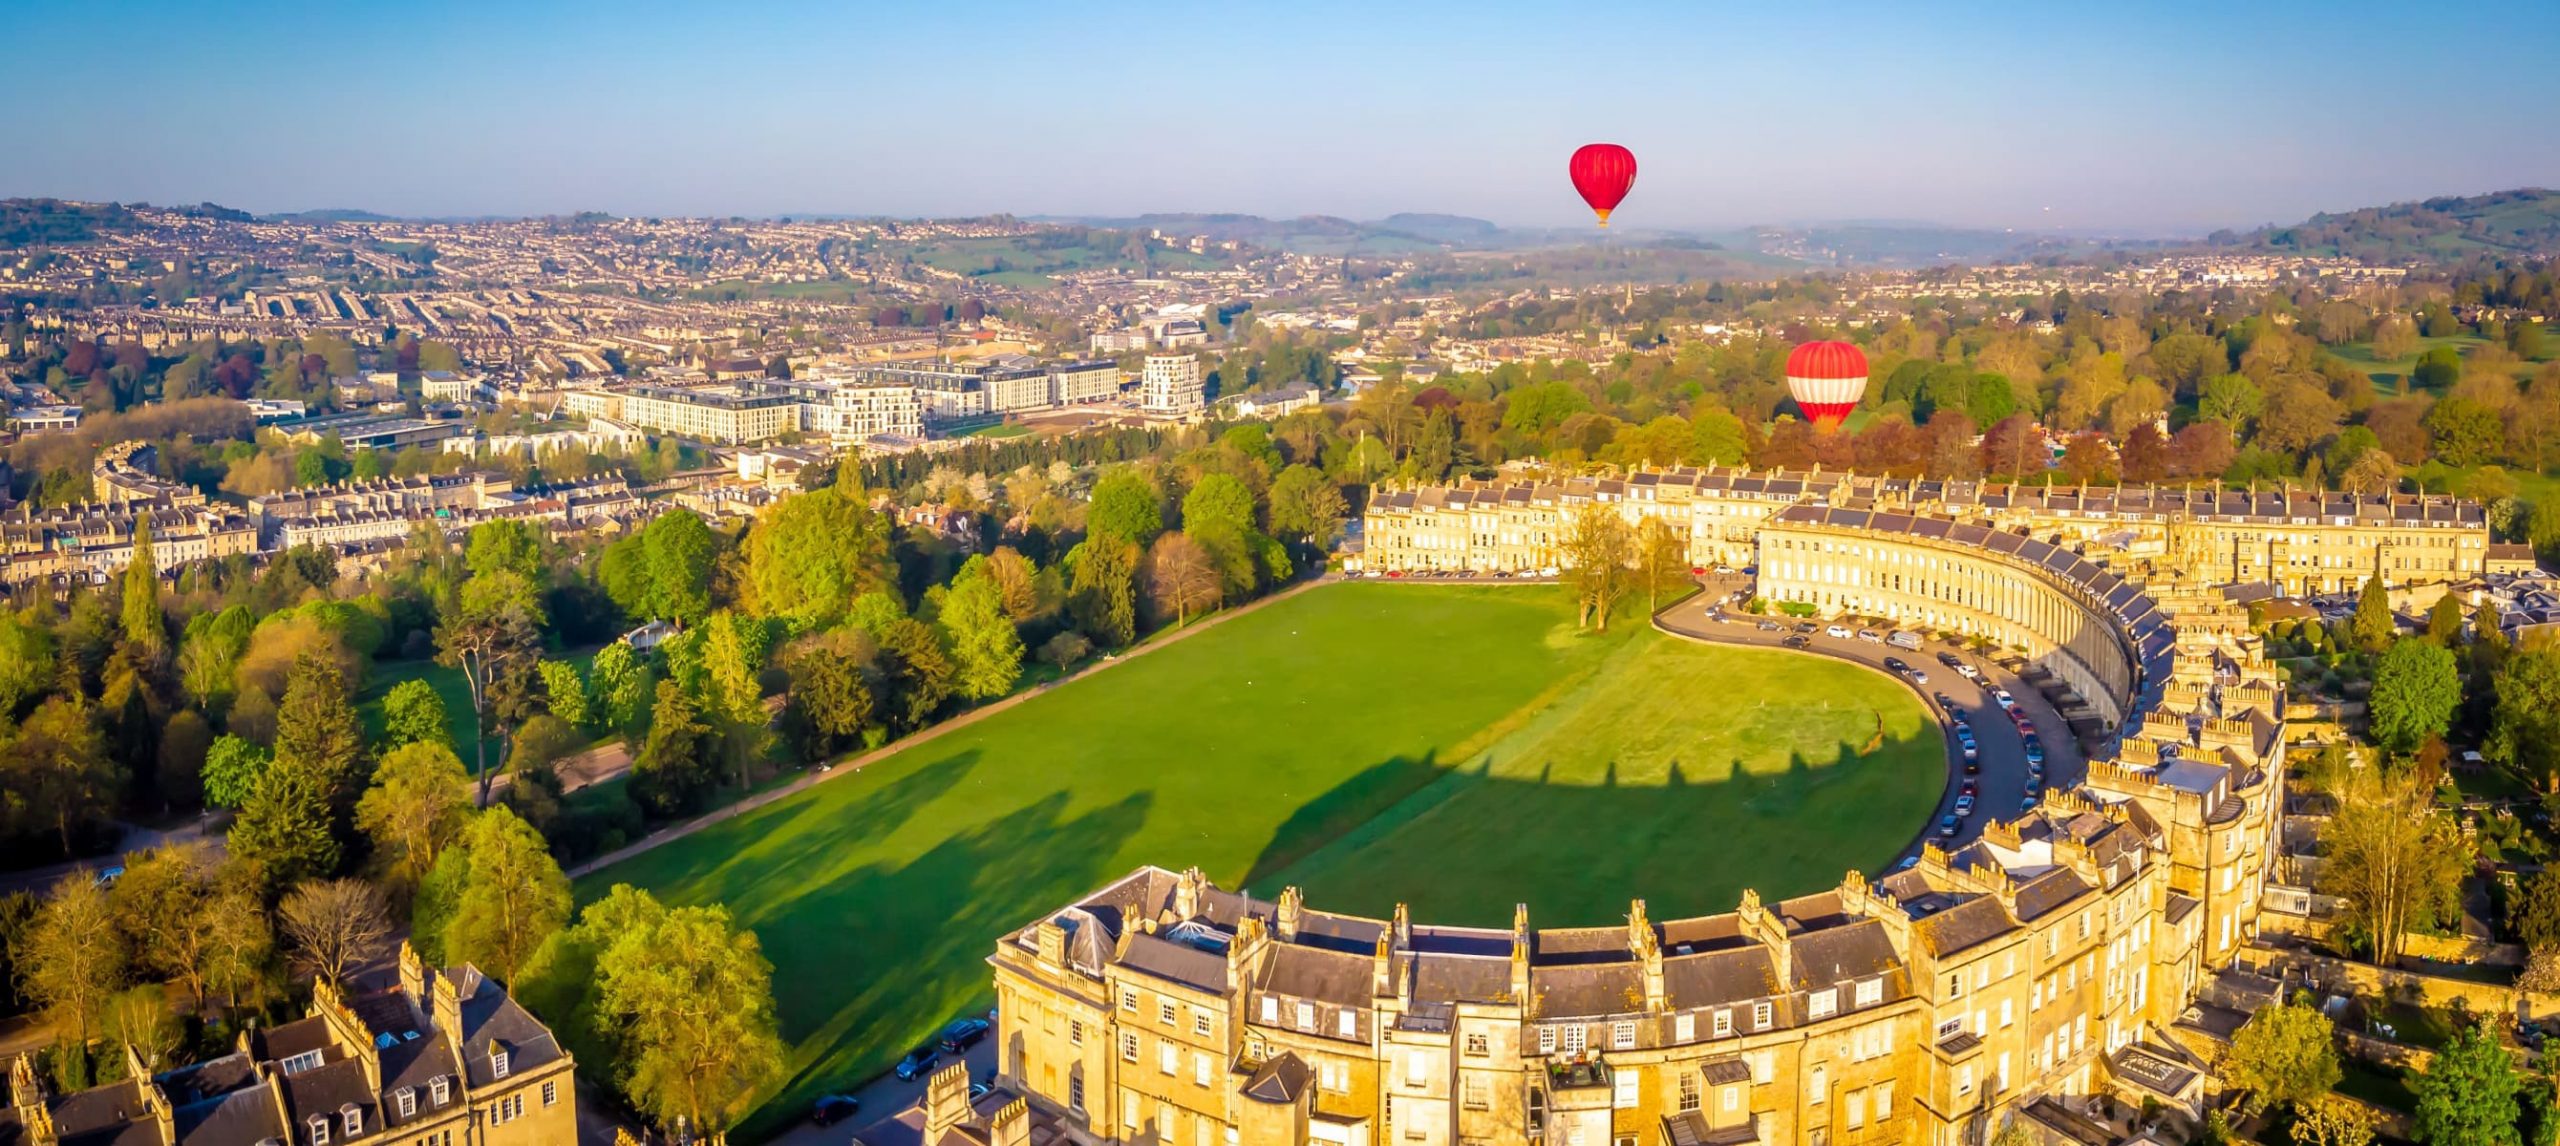 The 12 Most Amazing Things to do in Bath, England